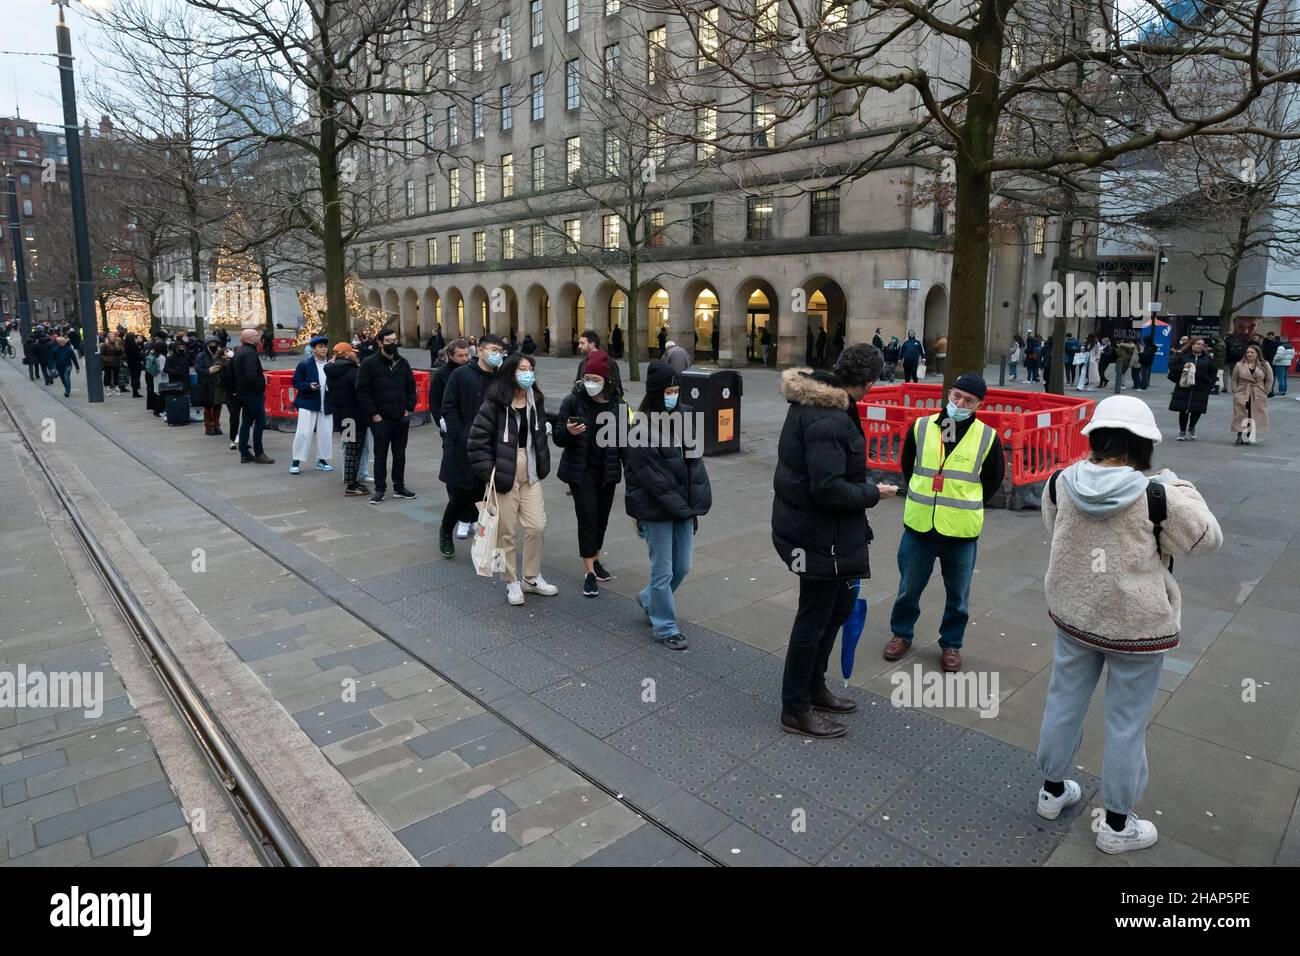 Manchester, UK, 14th December 2021. Members of thr public queue at a vaccination centre in central Manchester as fears grow that the Omicron variant will force the government into closing parts of the economy. Credit: Jon Super/Alamy Live News. Stock Photo